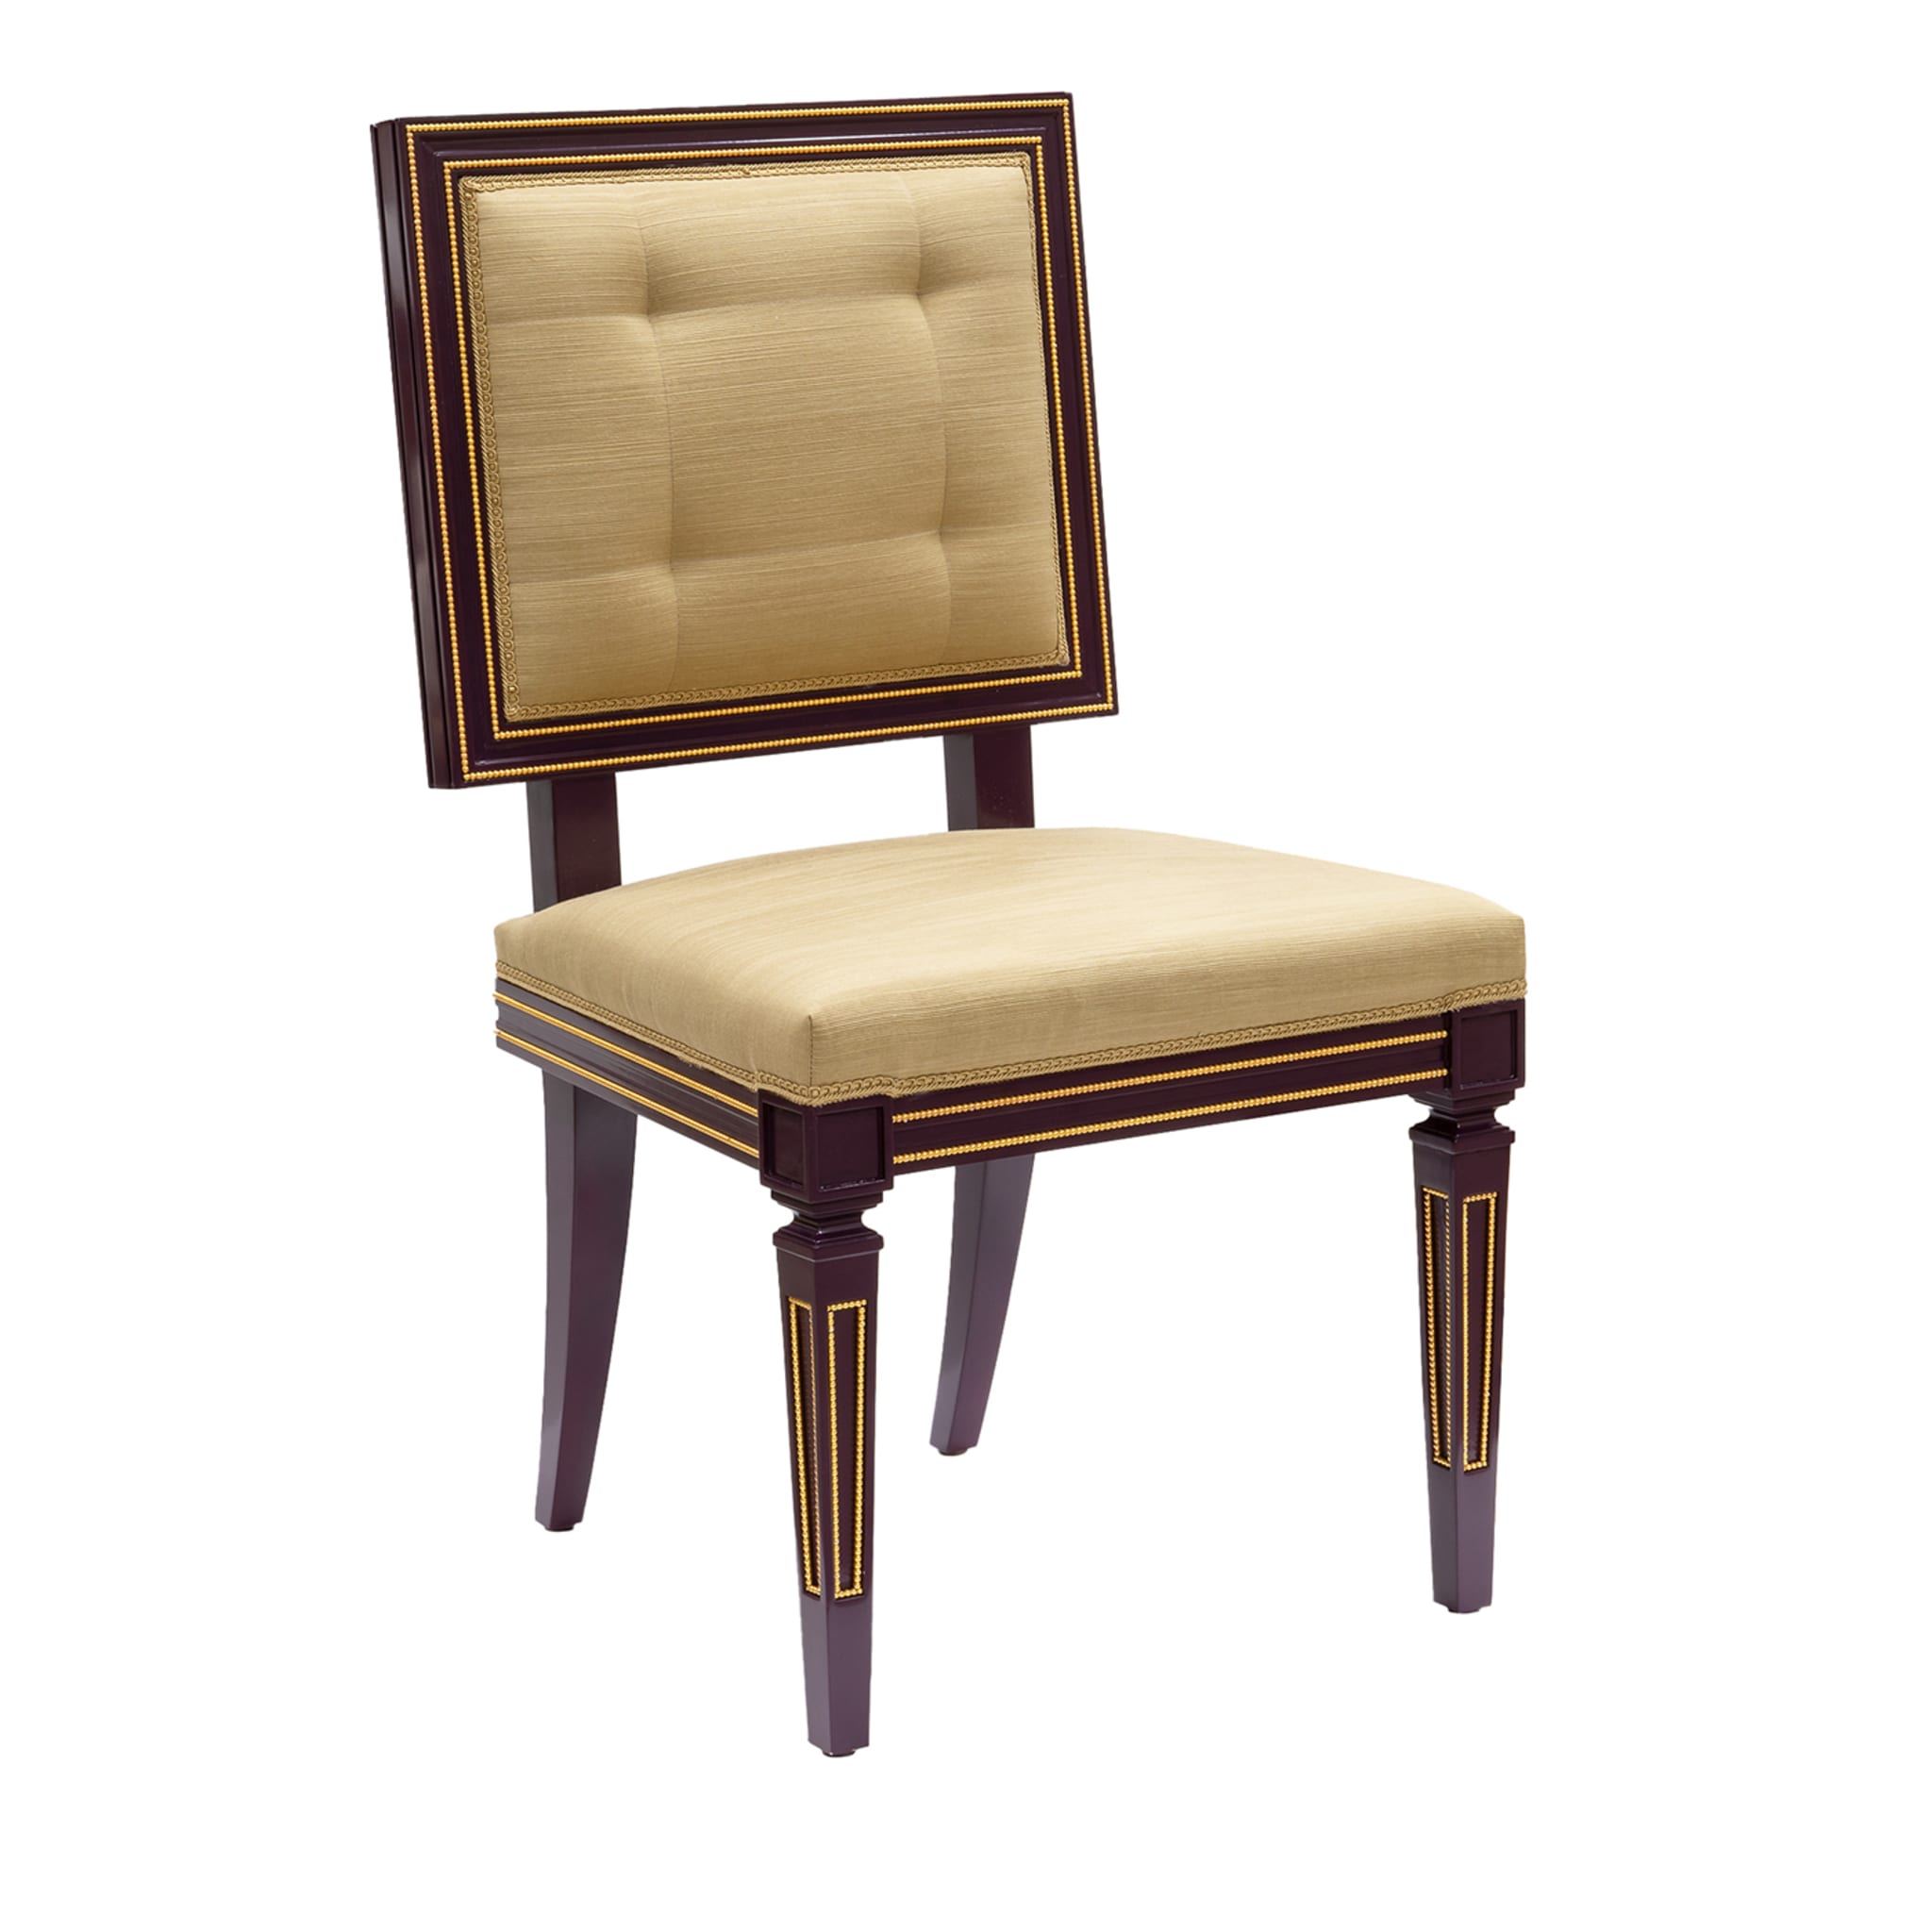 French Transition-Style Chair - Main view